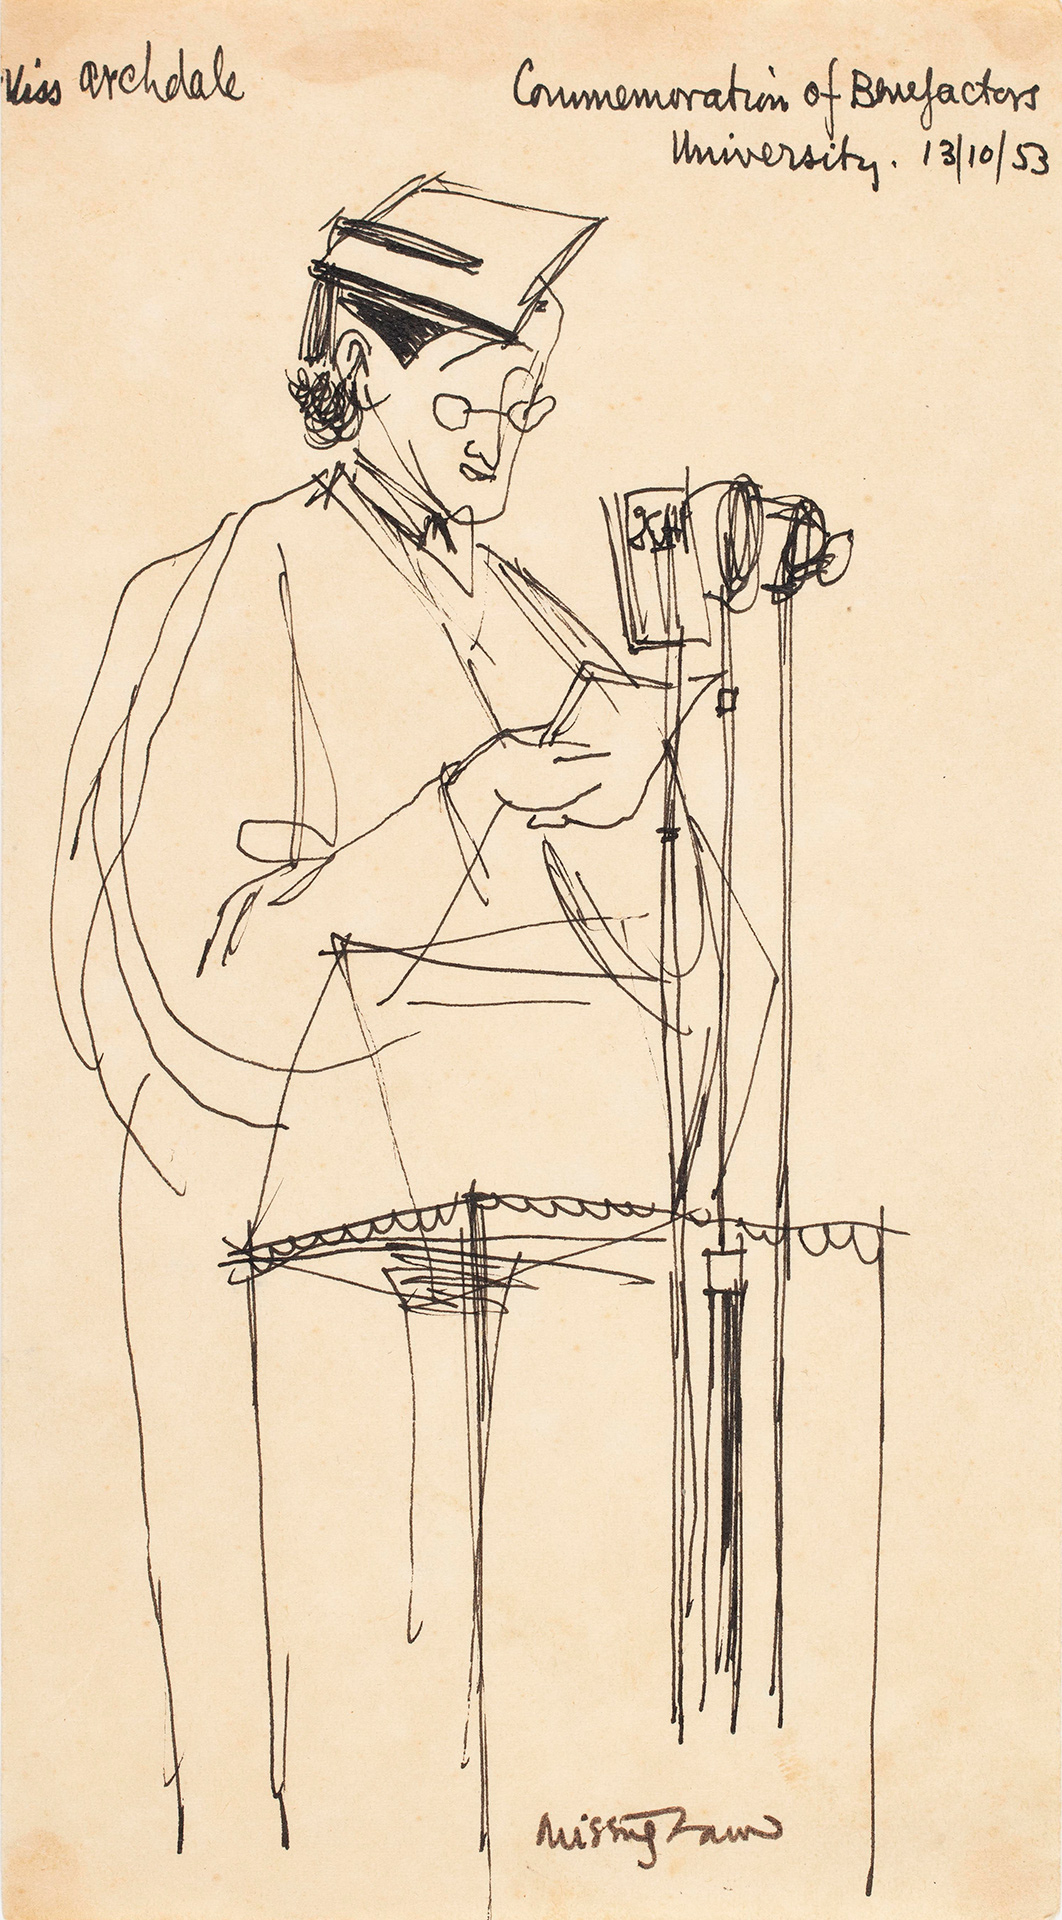 A sketch of a woman in academic garb at a podium.